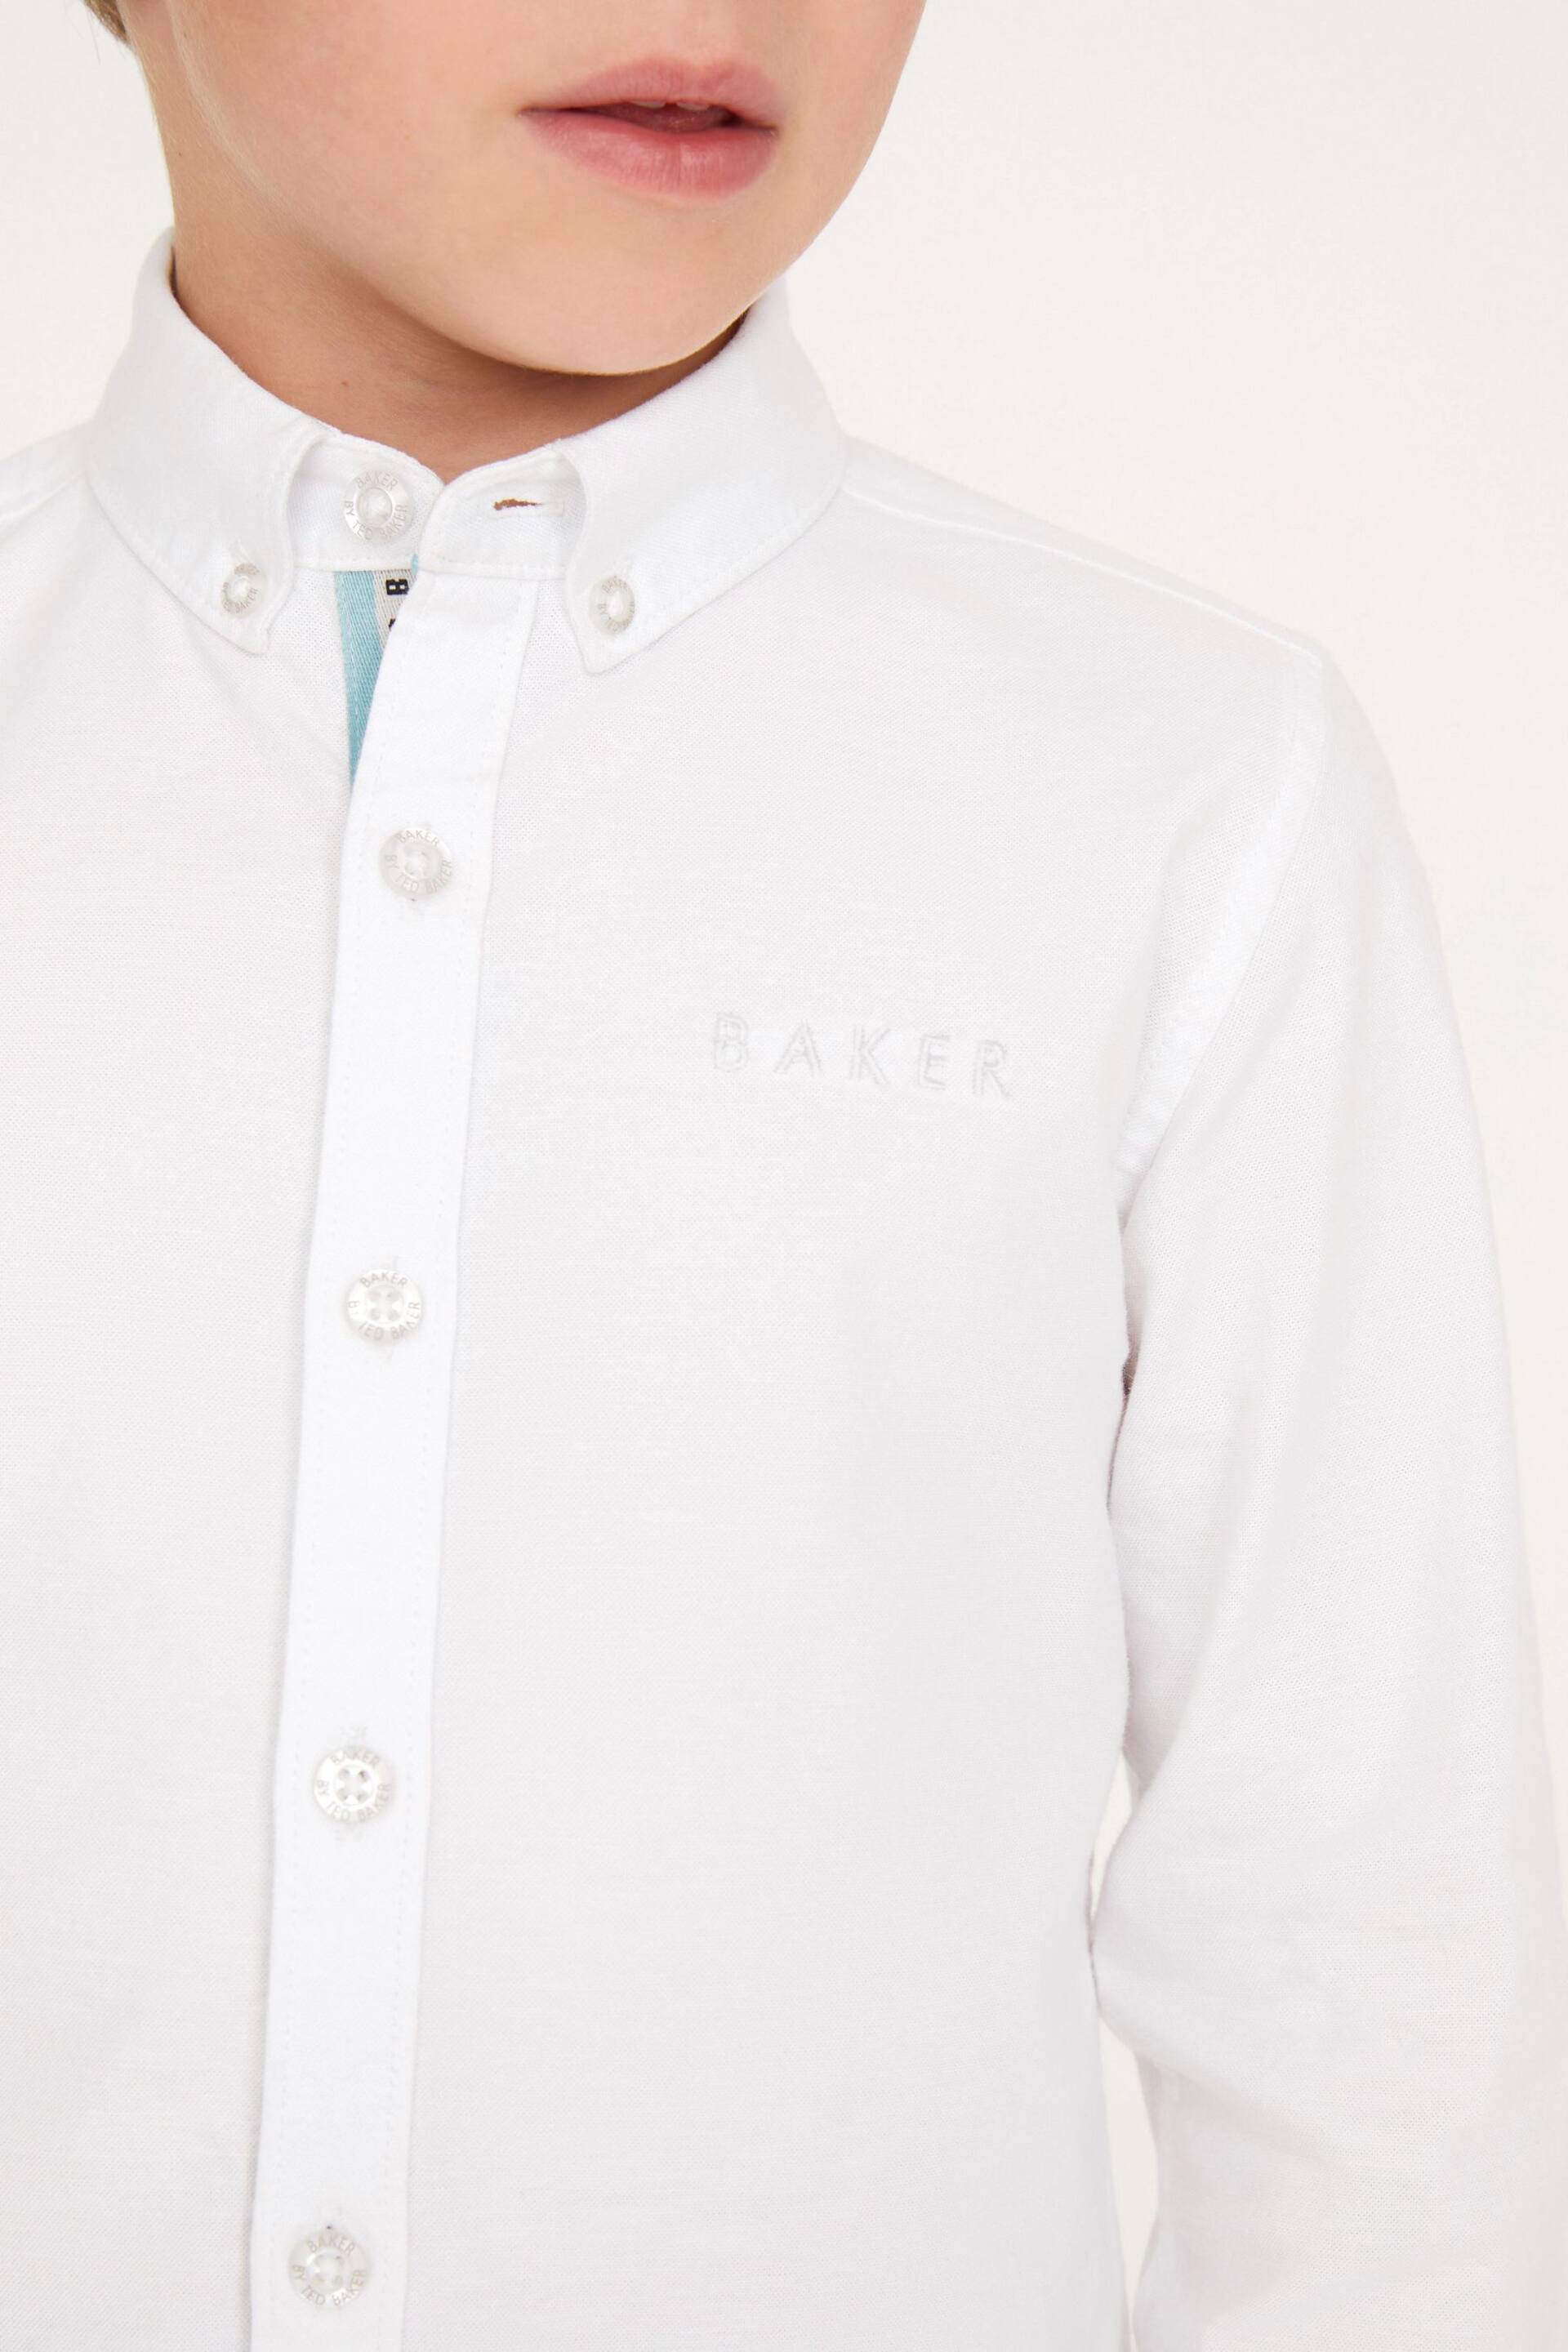 Baker by Ted Baker Oxford Shirt - Image 4 of 7